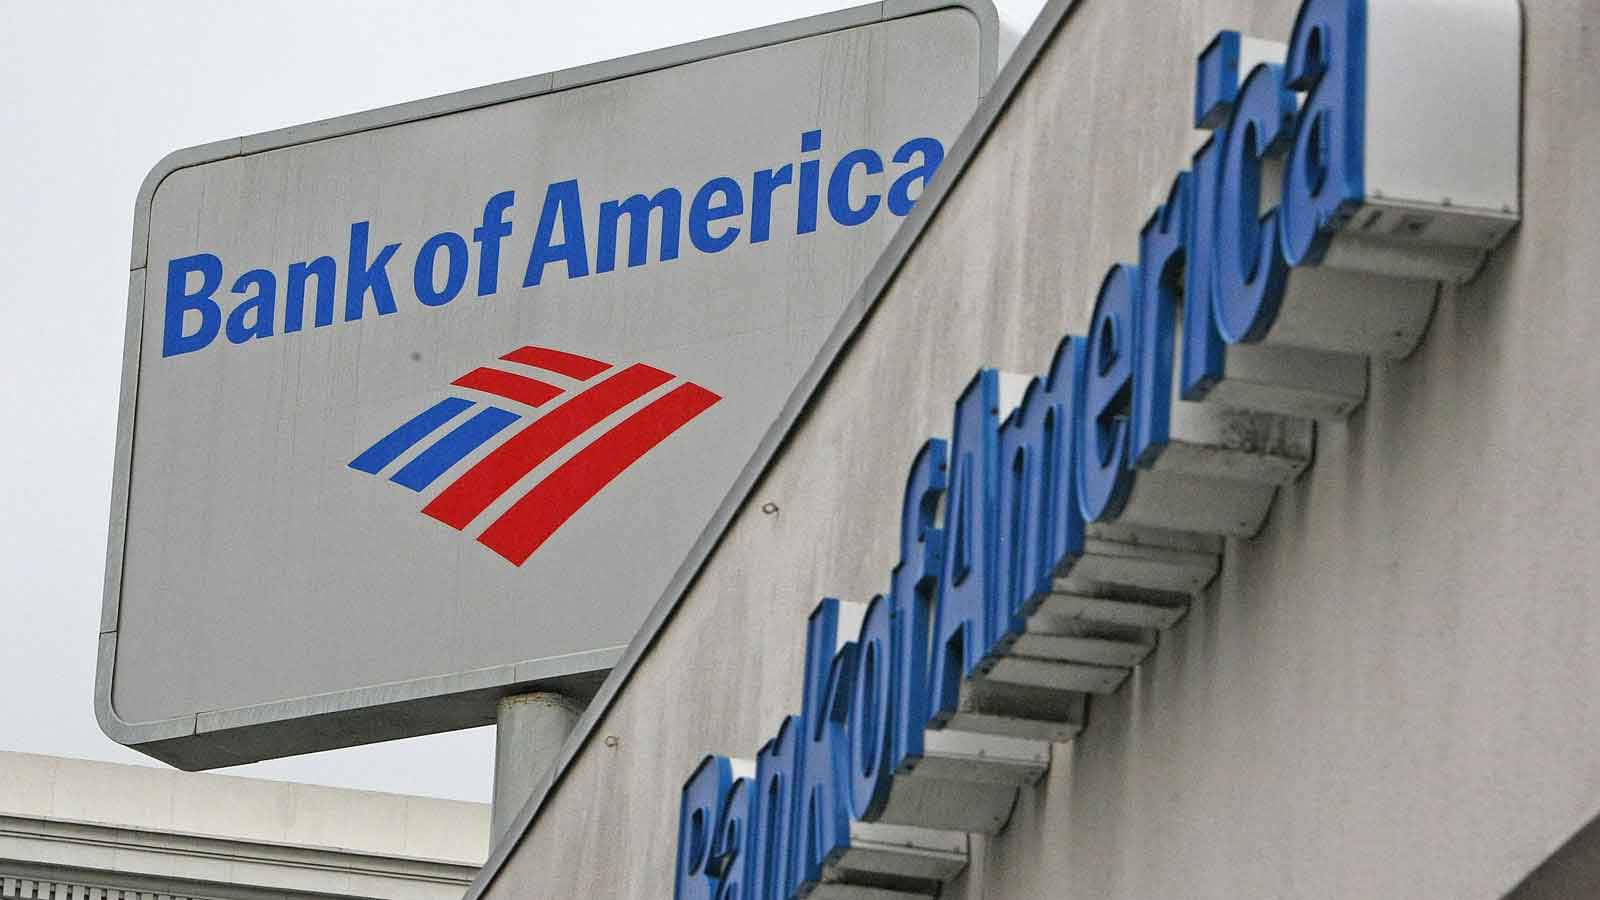 Bank of America to migrate to Windows 10